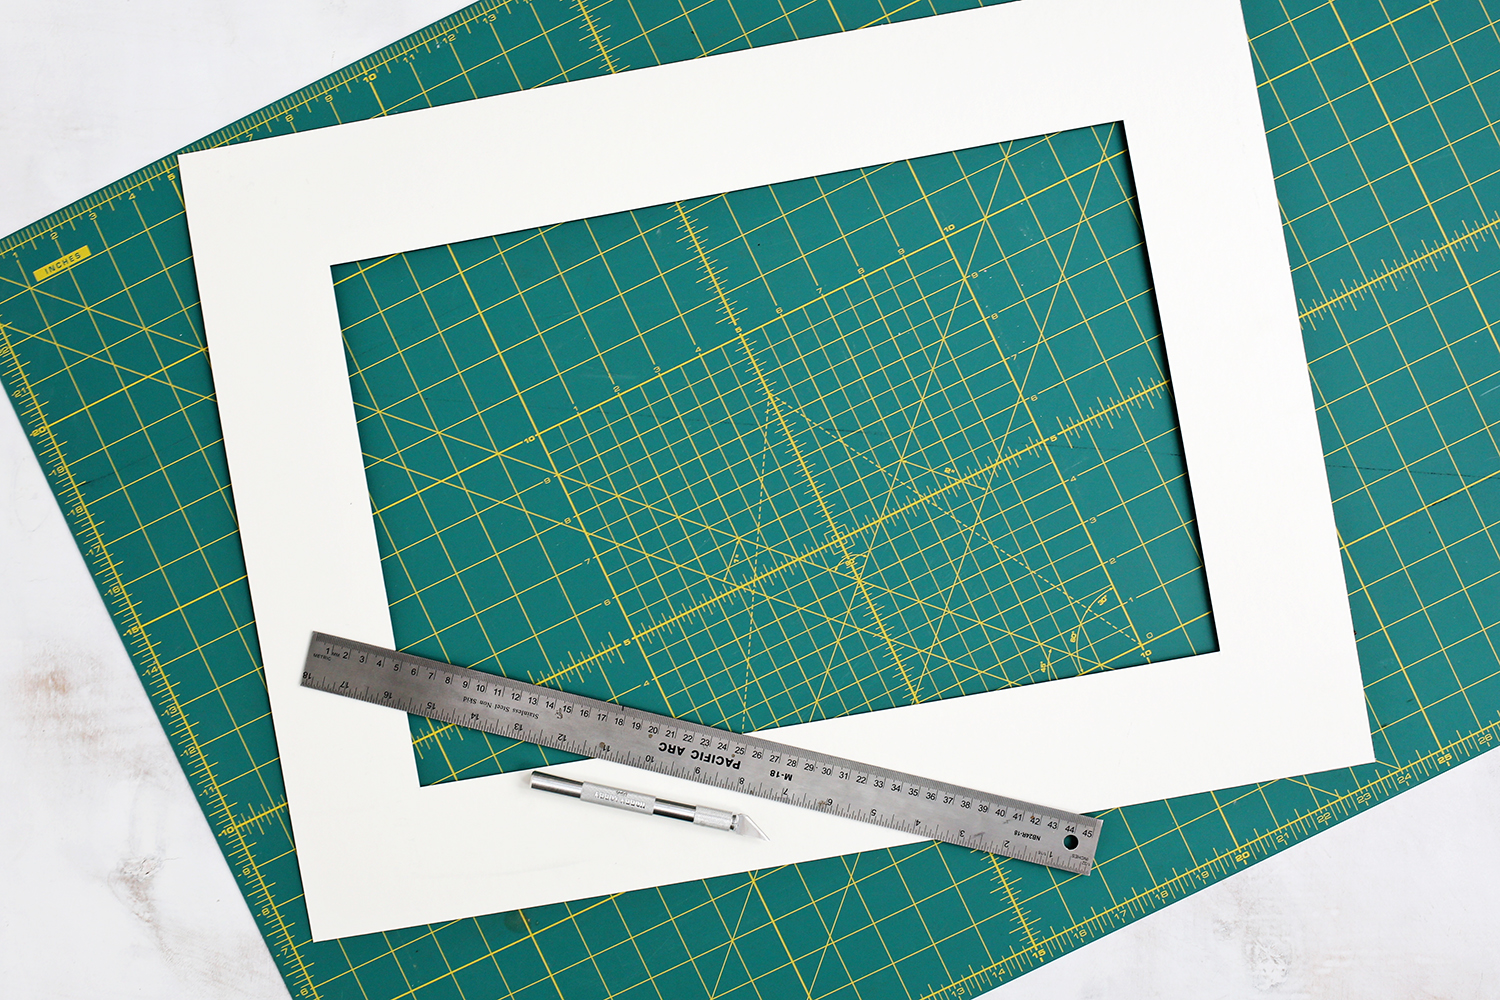 How to make your own photo mats — Interiors By Sarah Langtry